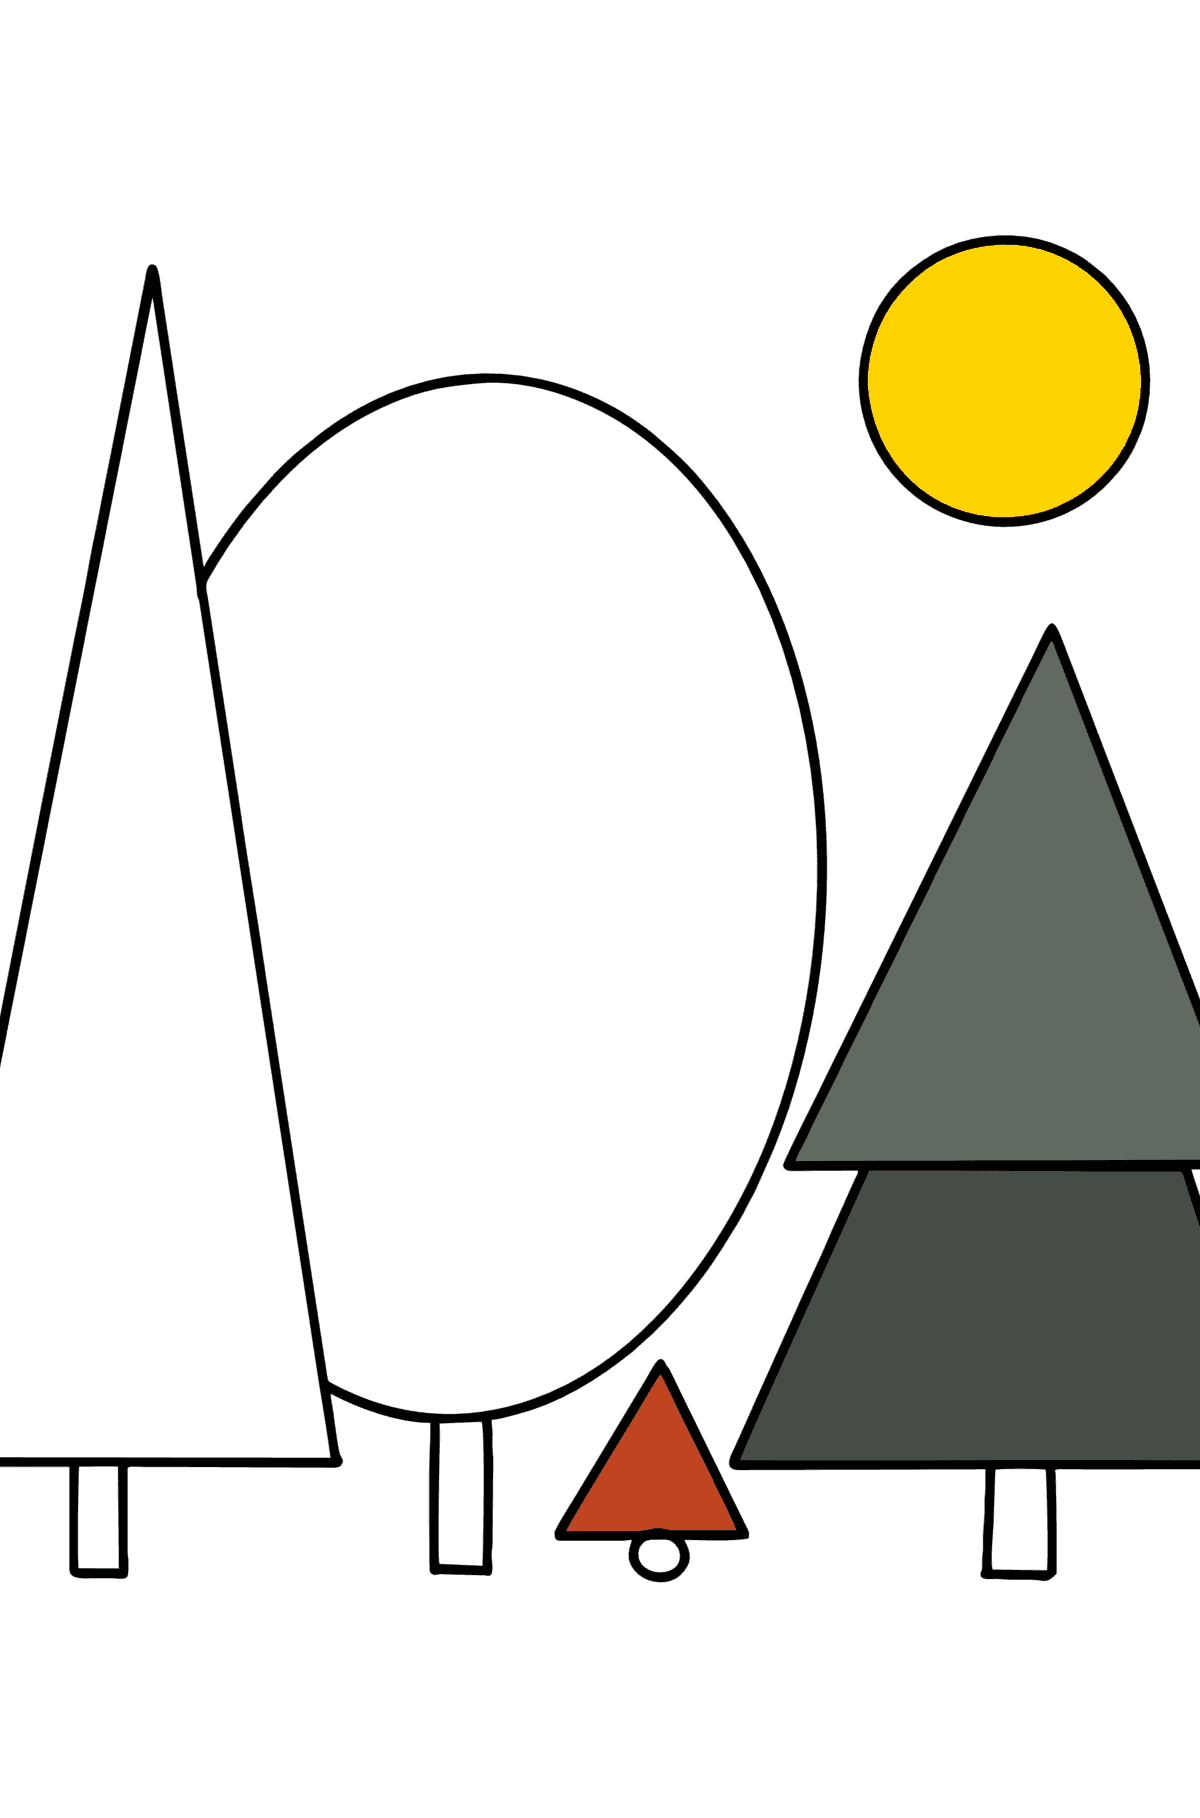 Geometric Forest Landscape coloring page - Coloring Pages for Kids